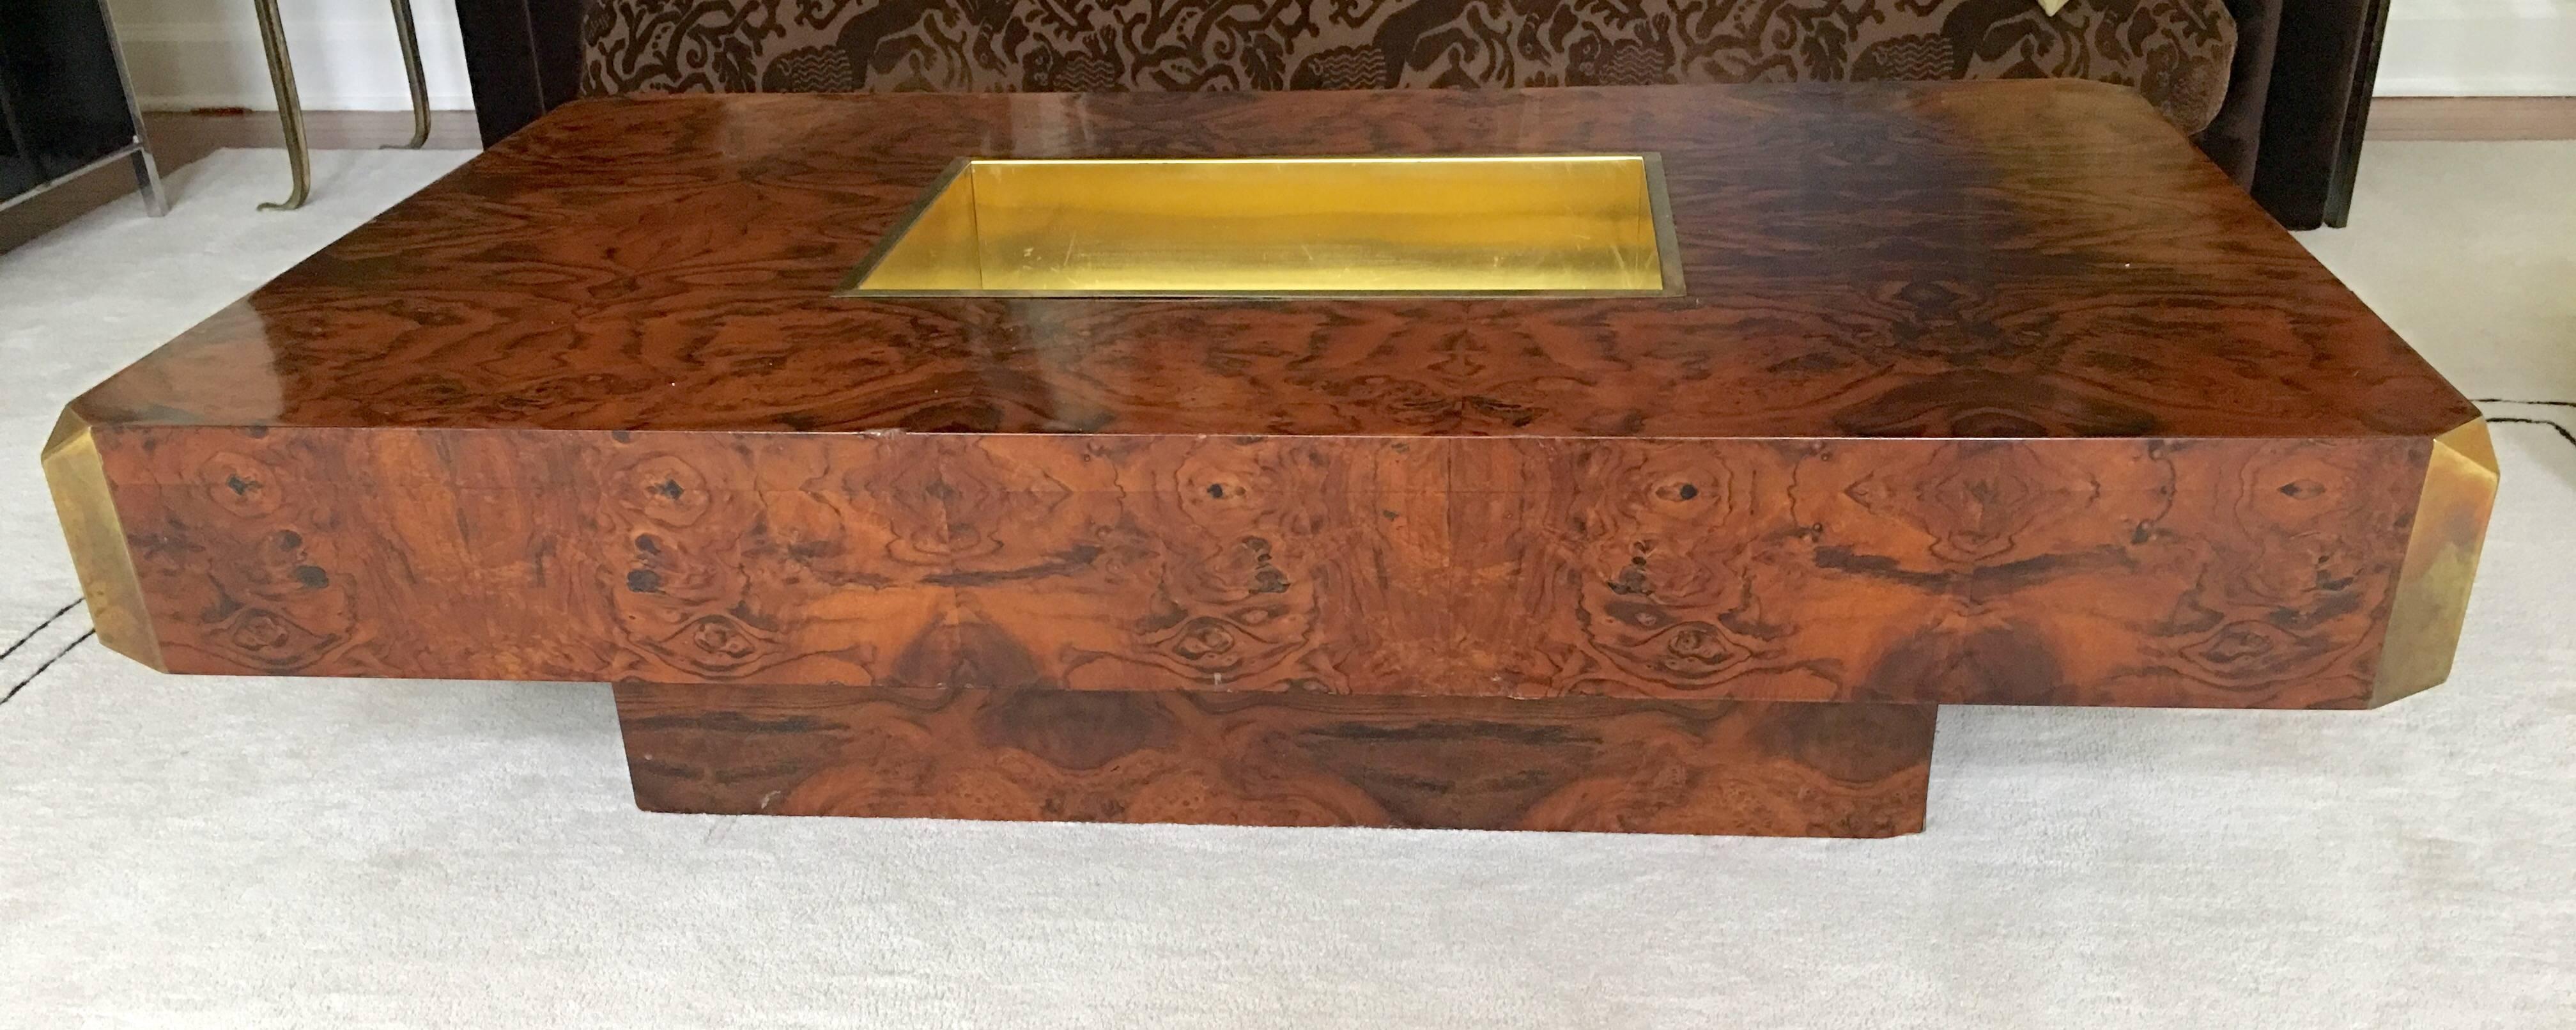 Veneer Tortoiseshell Finish Willy Rizzo Coffee or Cocktail Table For Sale